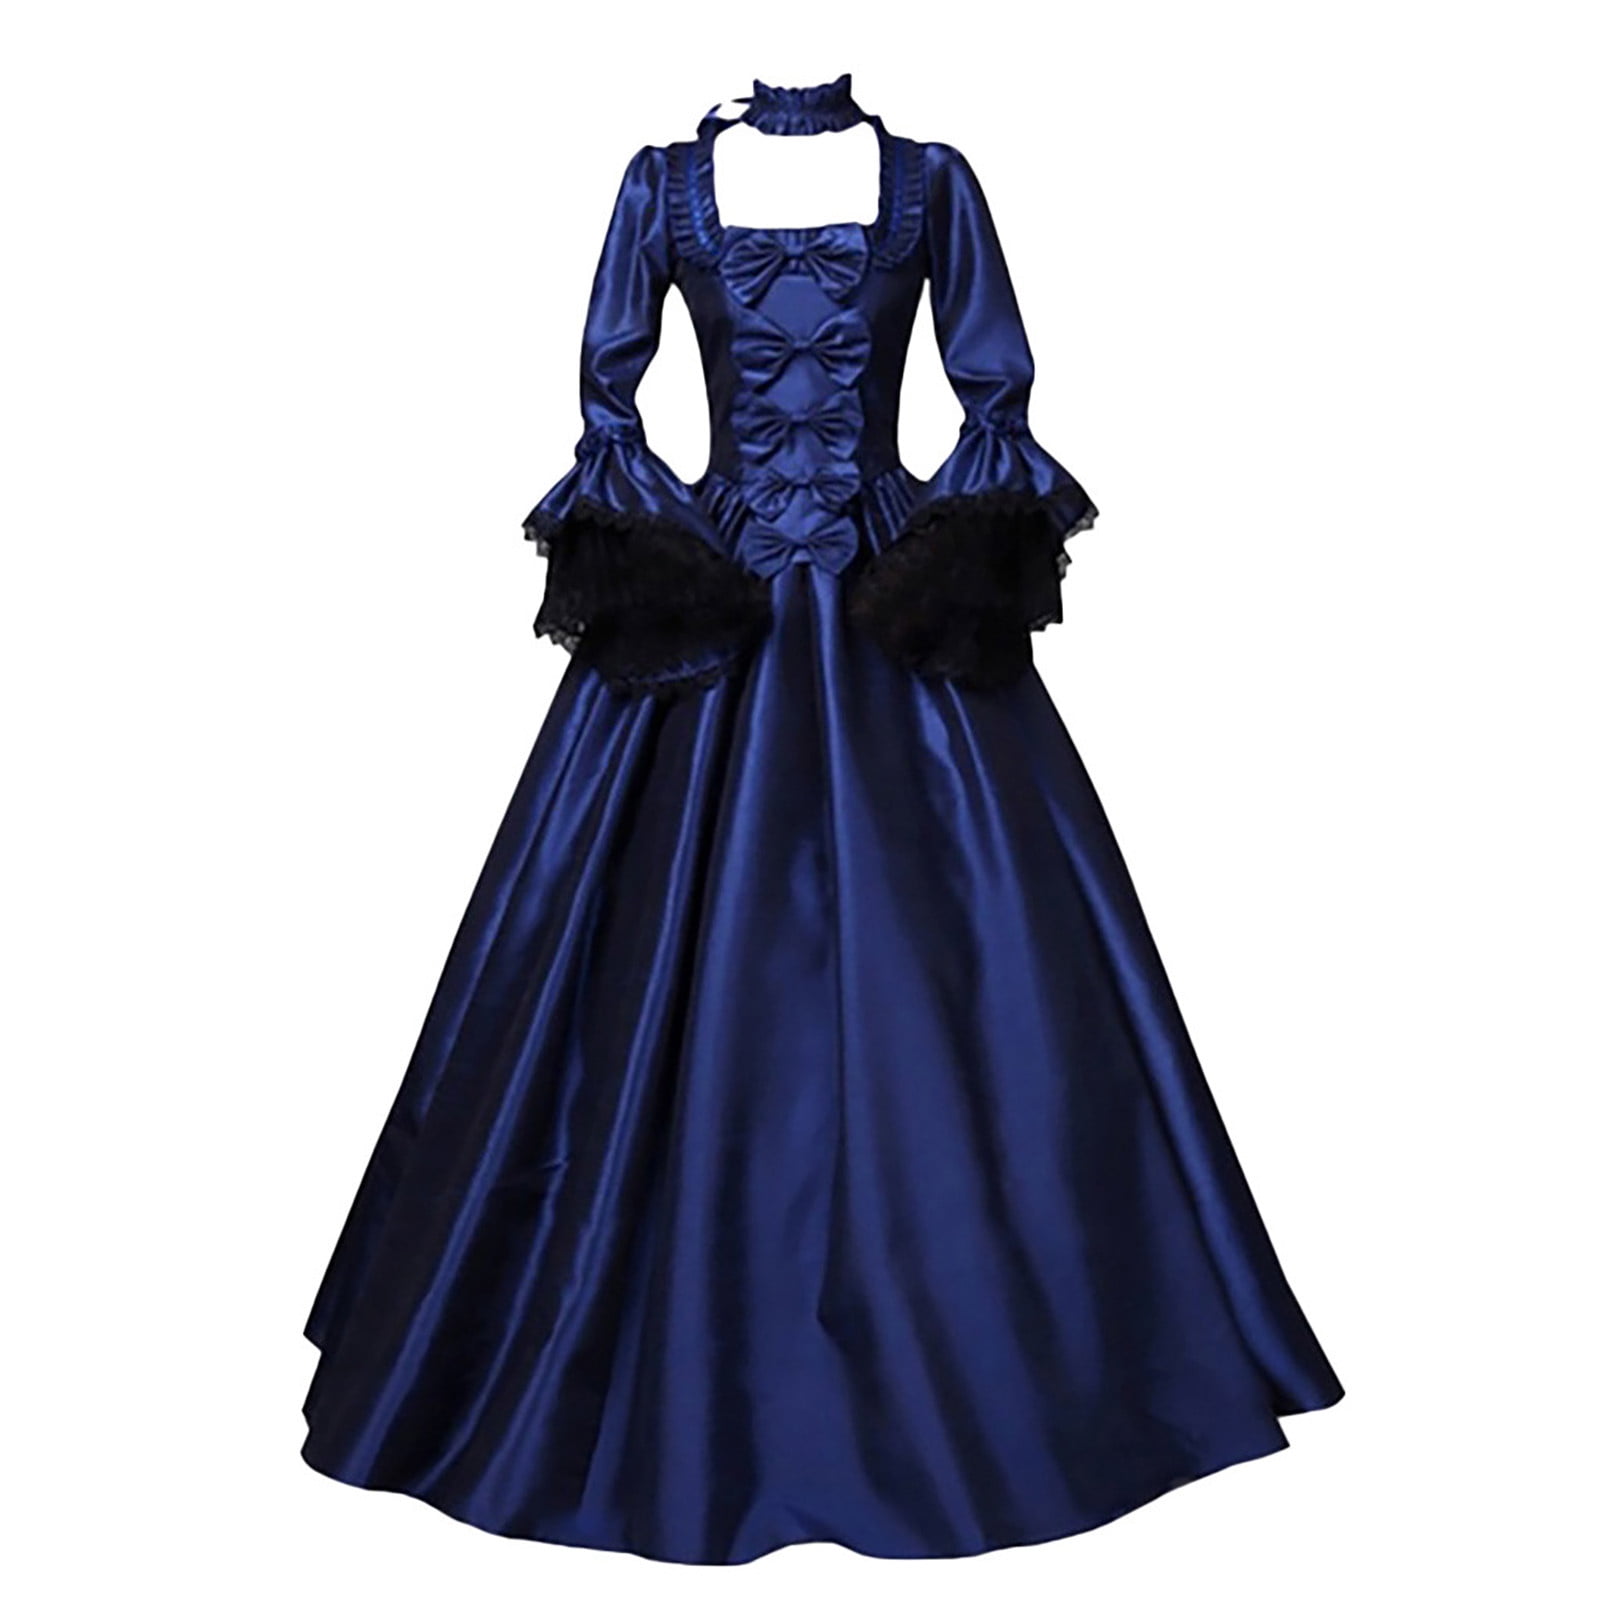 Dress gala Party dresses and events cocktail graduation ball gown for  special event birthday guest quinceanera evening gowns - AliExpress